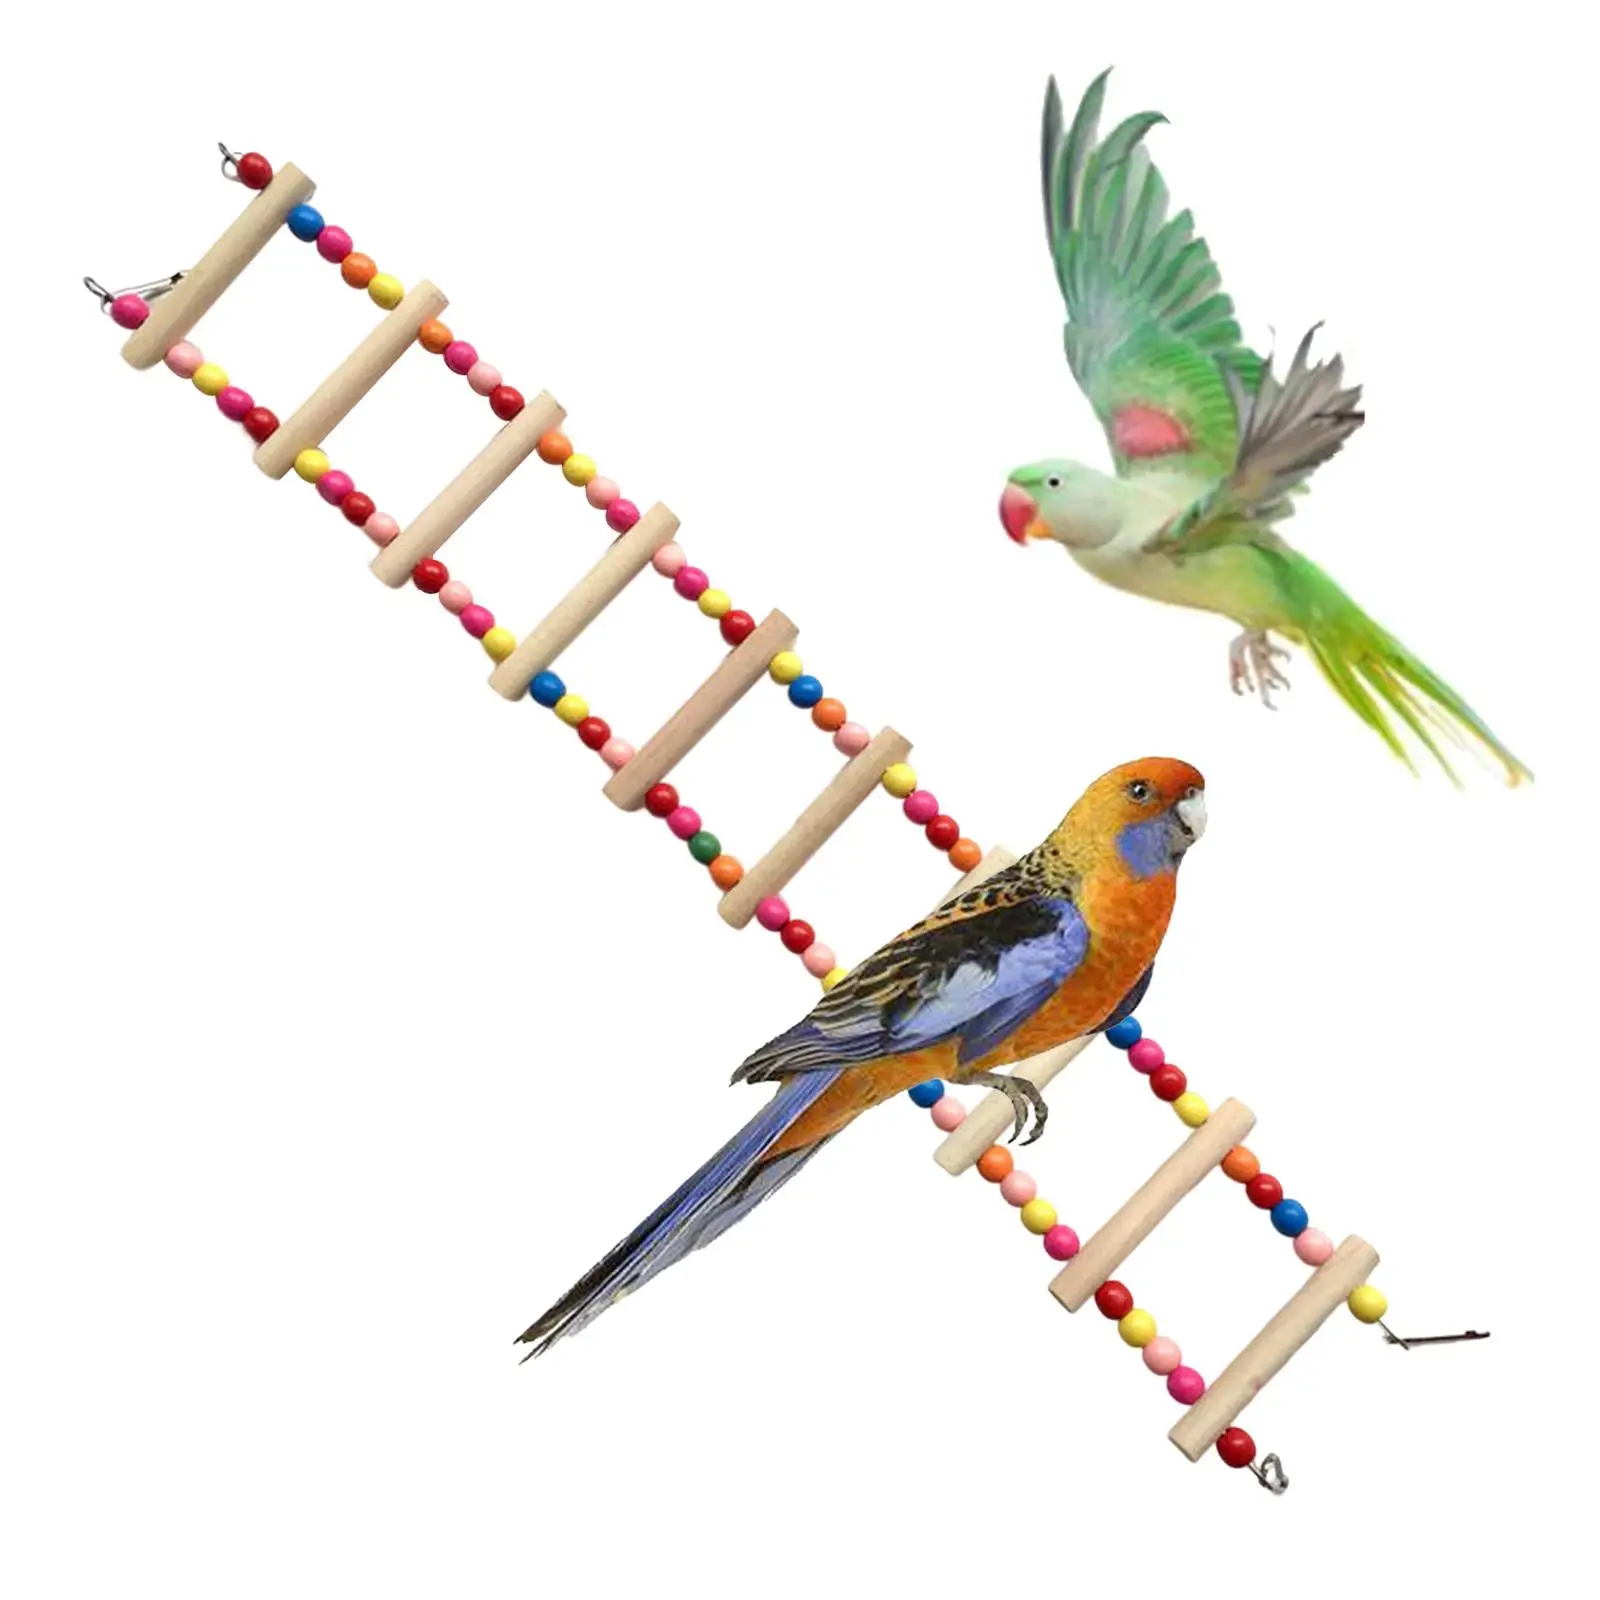 Multicolor Bird Ladder Parrots Swing Climbing Encourages Foot Exercise for Conures Lovebird Cockatiels Budgie Small Parakeets